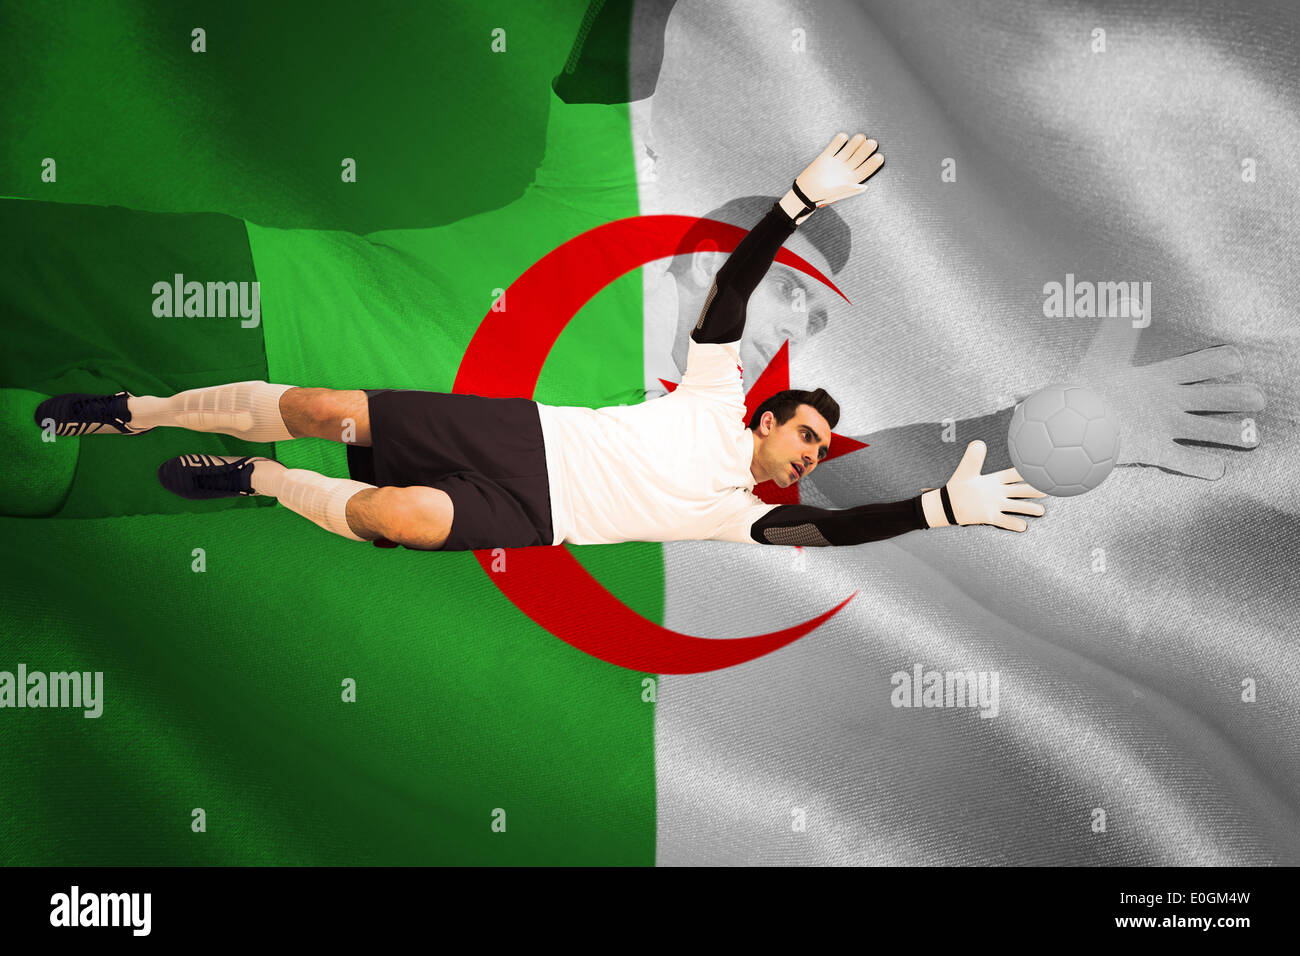 Goalkeeper in white making a save Stock Photo